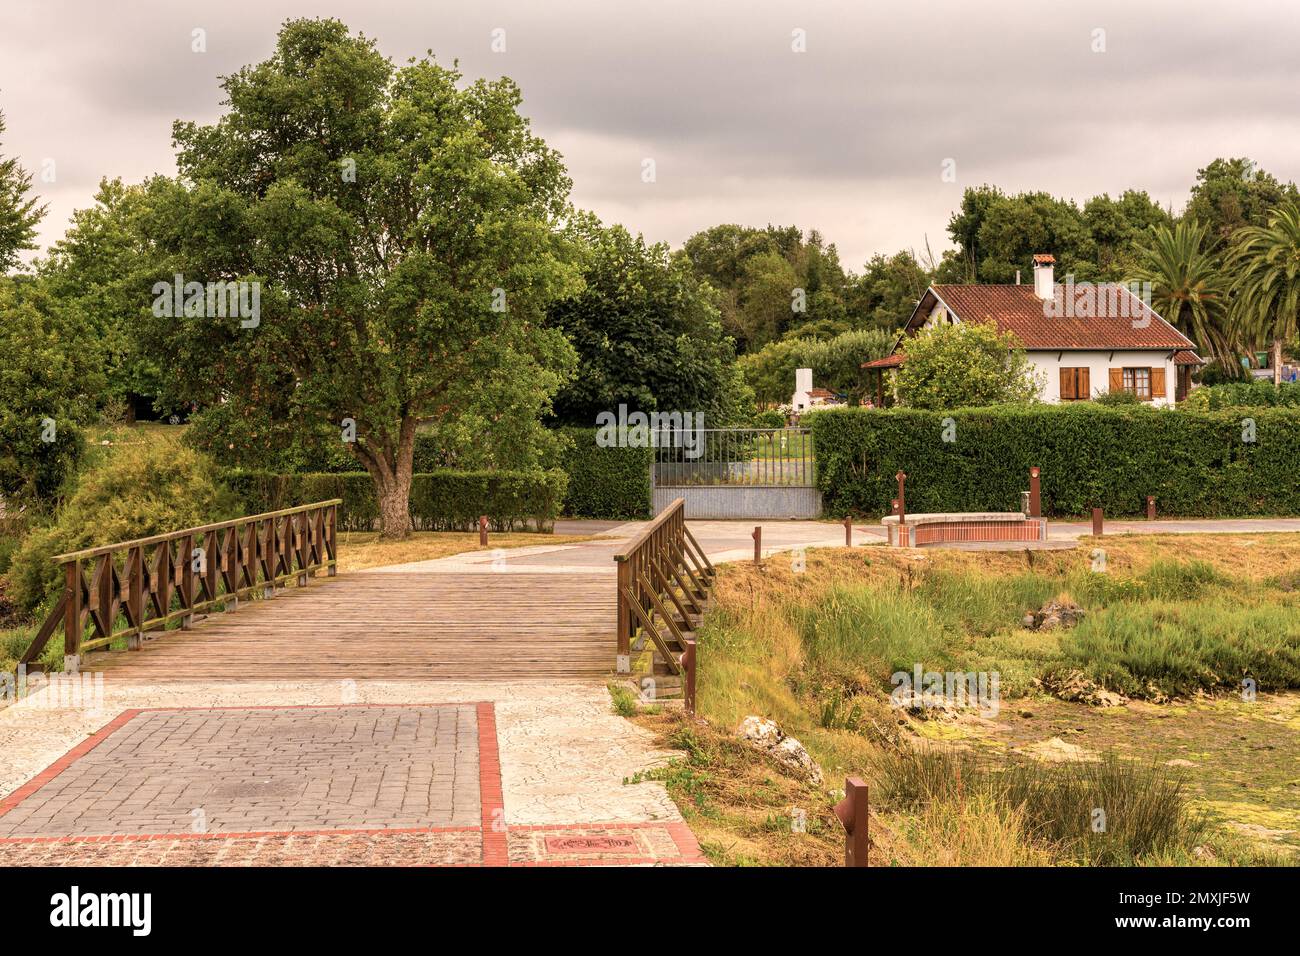 wooden bridge that leads to a chalet house with individual tree garden, private residence in the town of Argoños, Argonos, Cantabria, Spain, Europe. Stock Photo